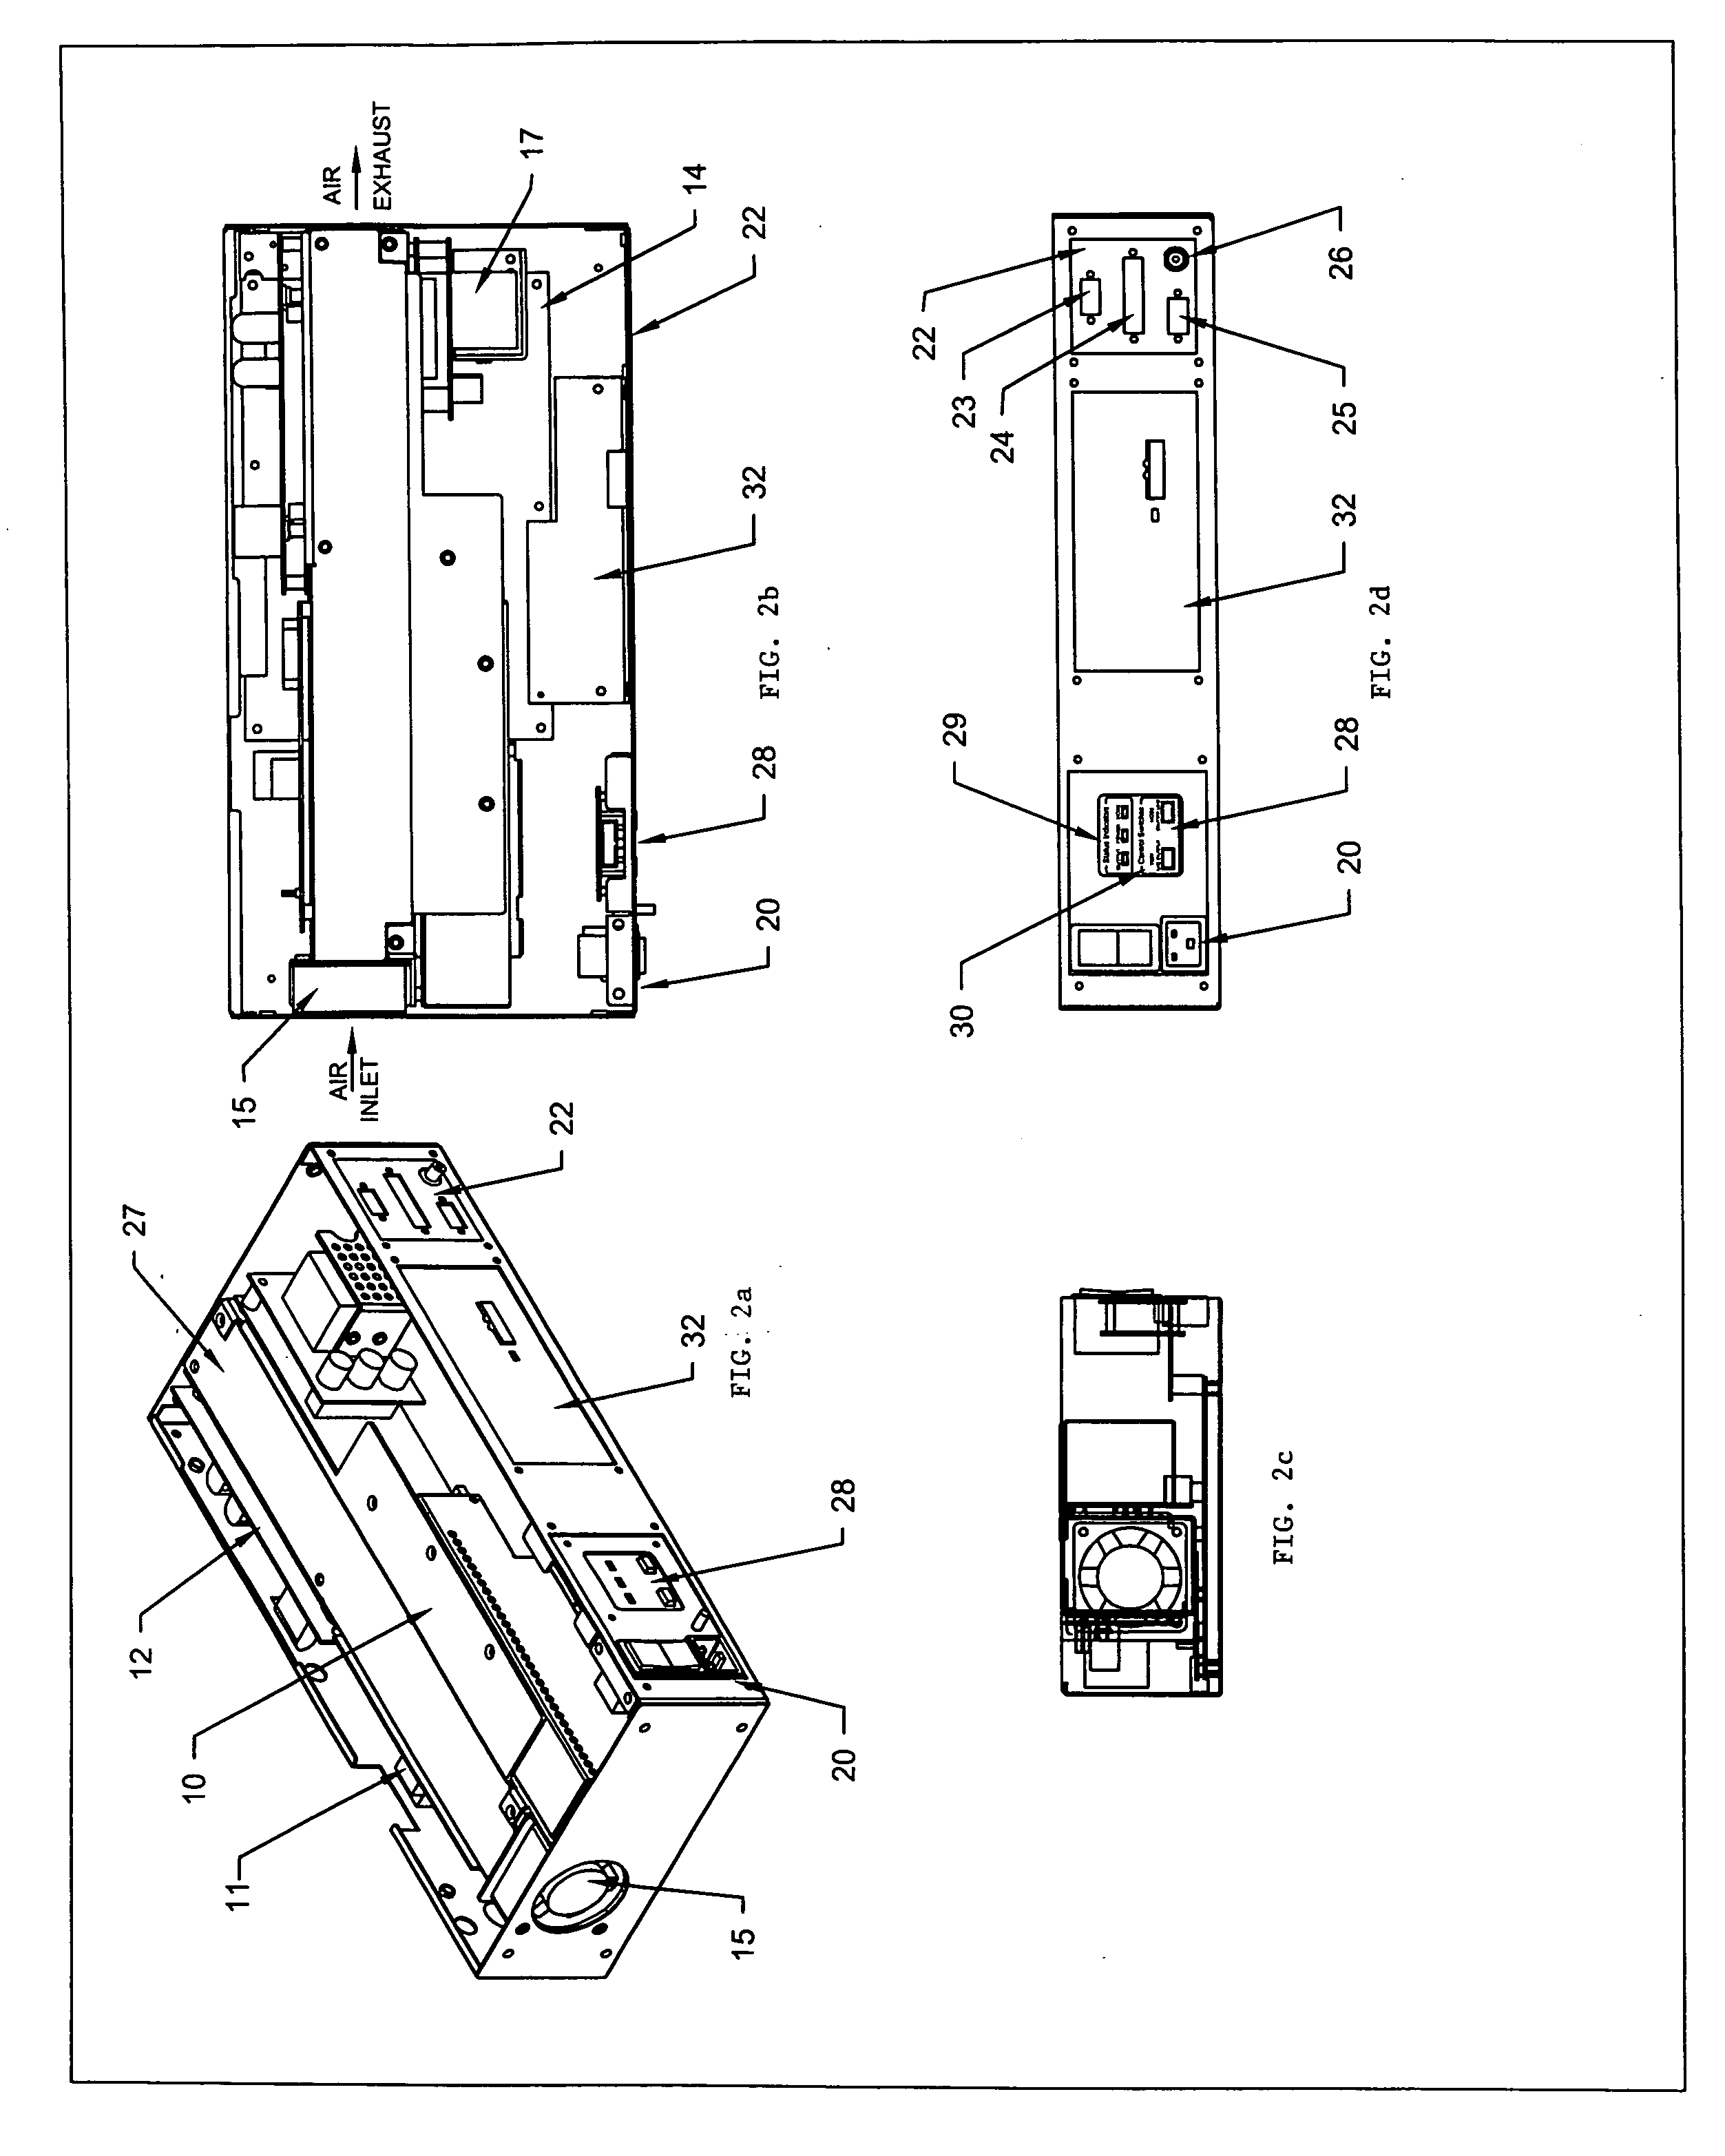 Systems for providing controlled power to ultrasonic welding probes